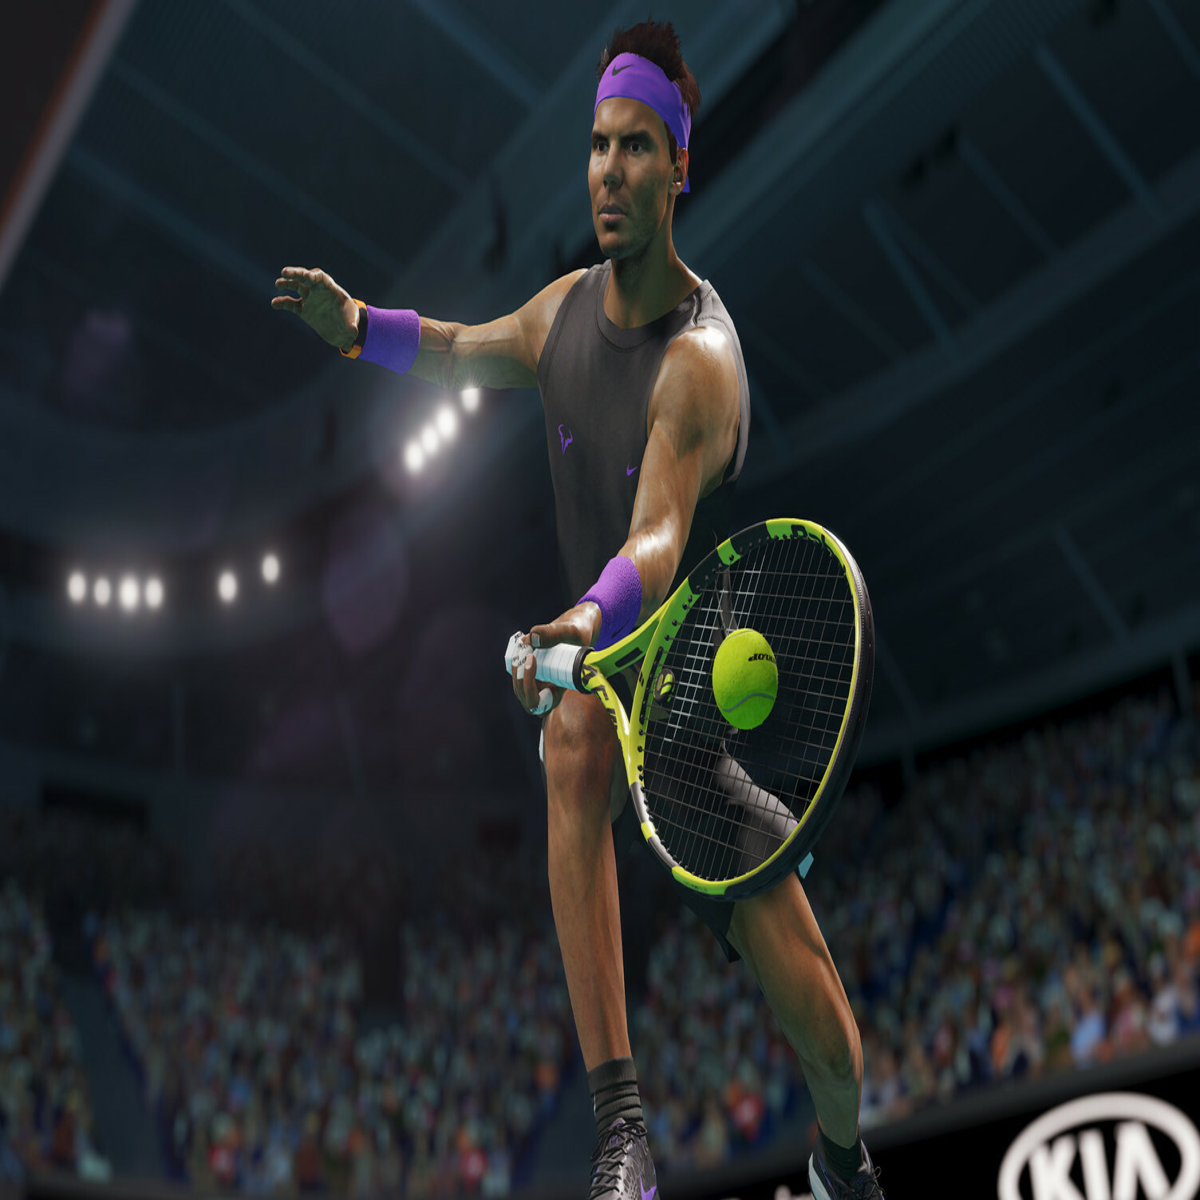 Tiebreak - Official Game of the ATP AND WTA - 2023 - NEW Big Ant